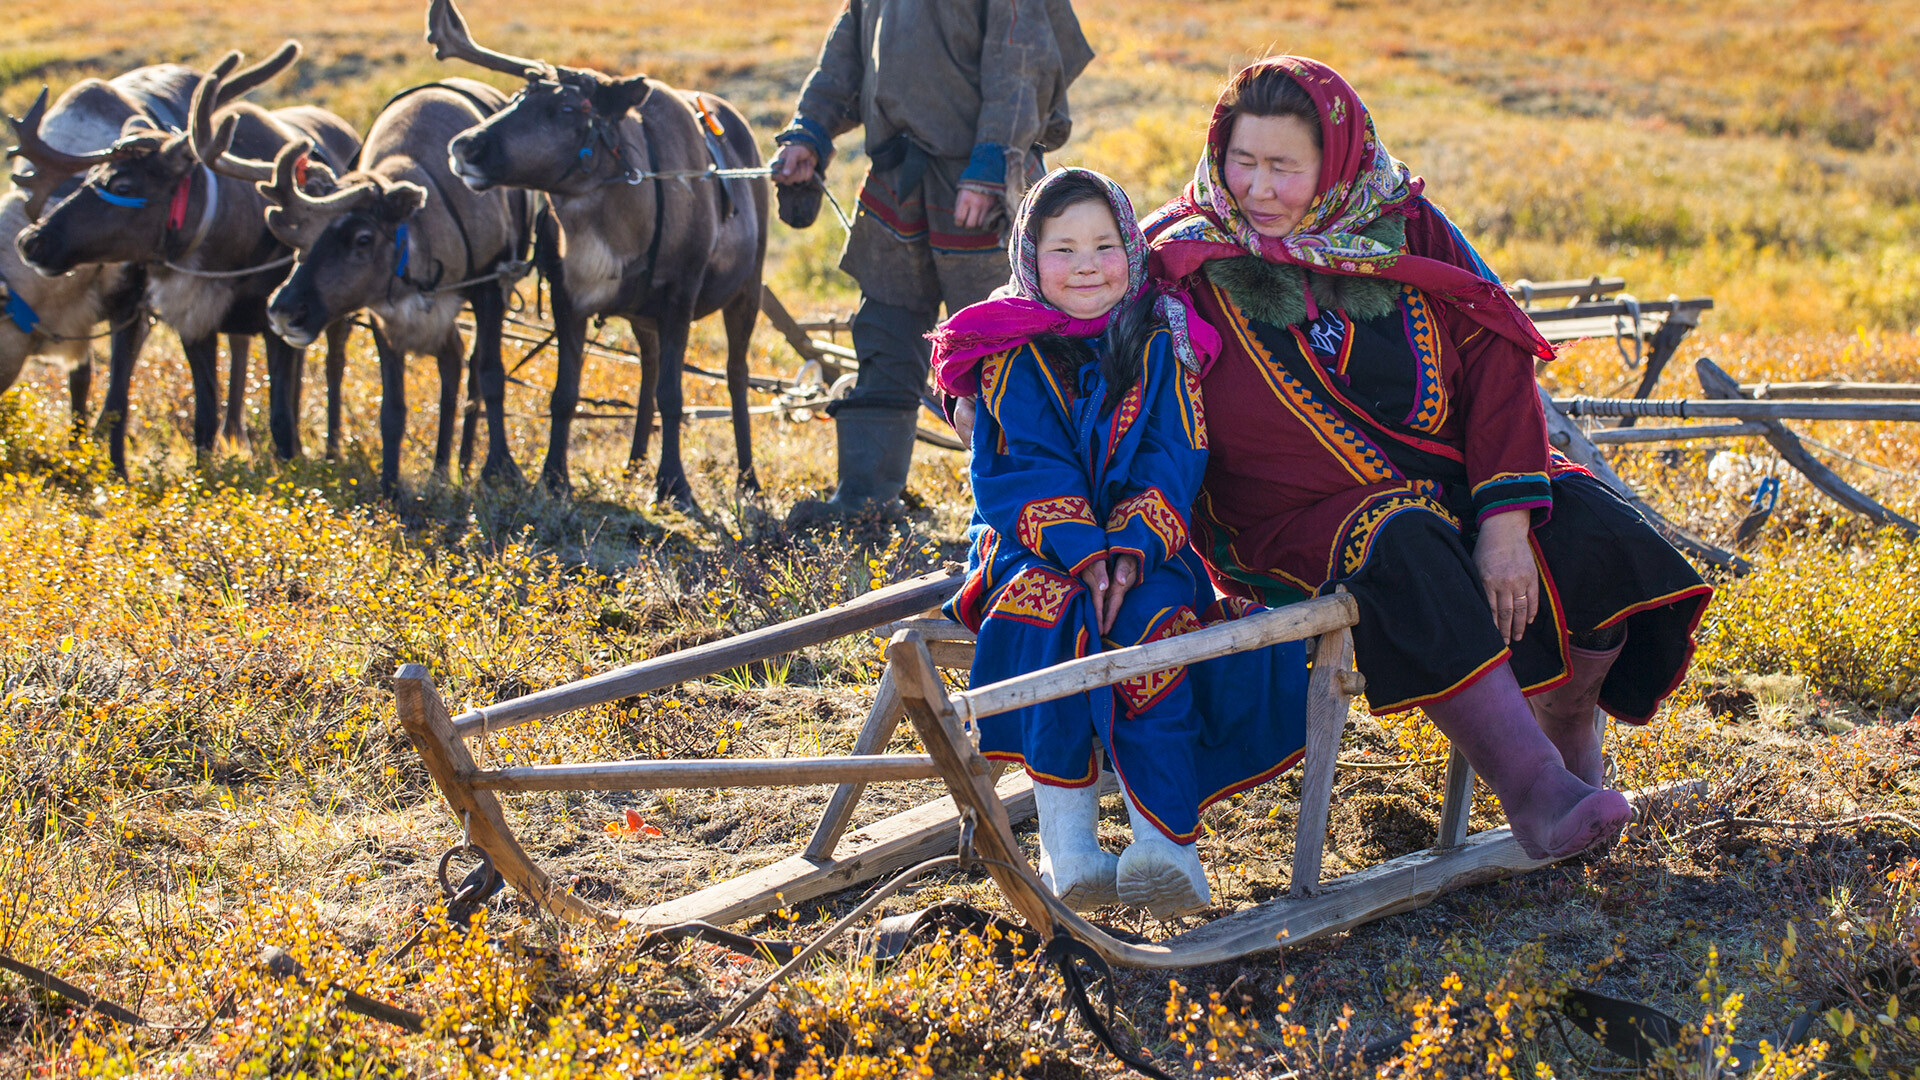 Yamal, the family of Nenets people in the tundra.